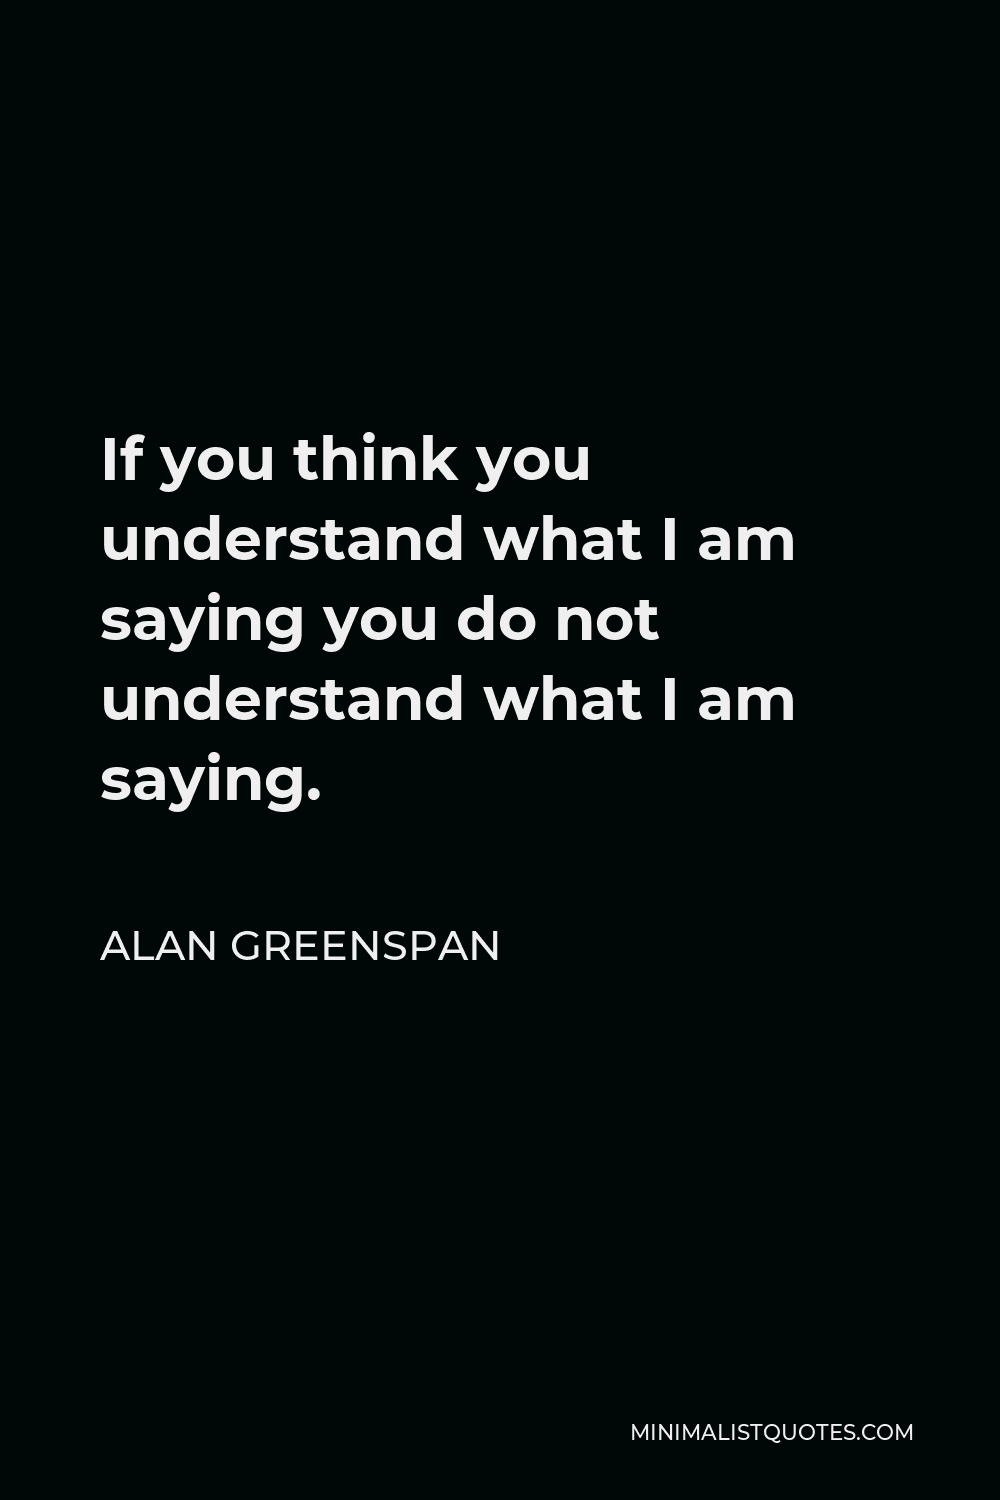 Alan Greenspan Quote - If you think you understand what I am saying you do not understand what I am saying.